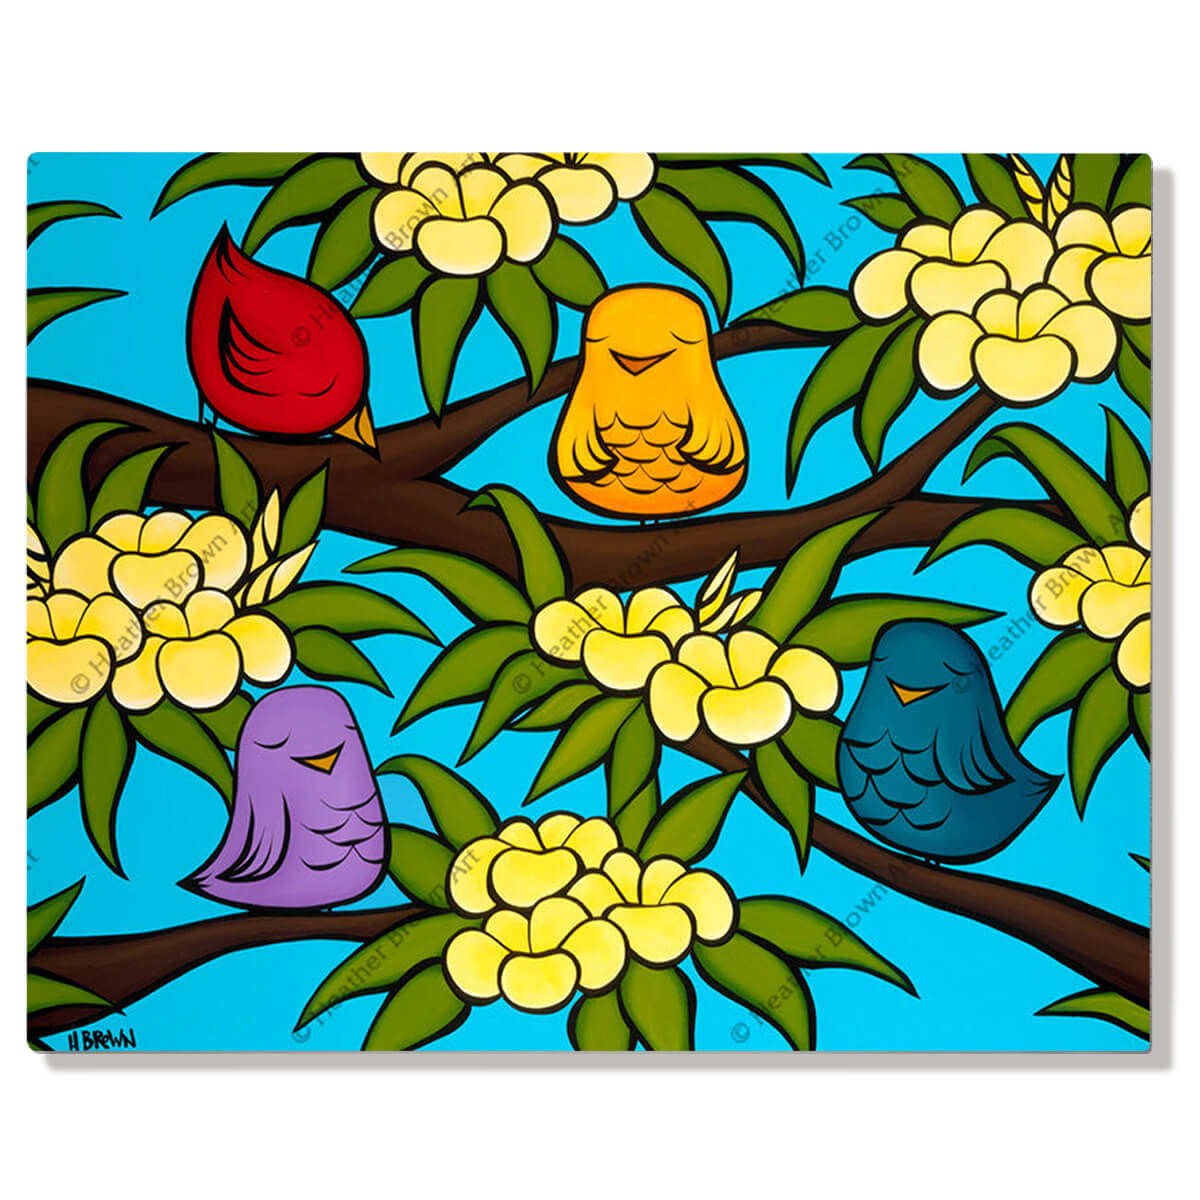 A metal art print featuring joyous and colorful birds sitting amongst fragrant yellow plumeria branches on a warm sunny day by Hawaii surf artist Heather Brown